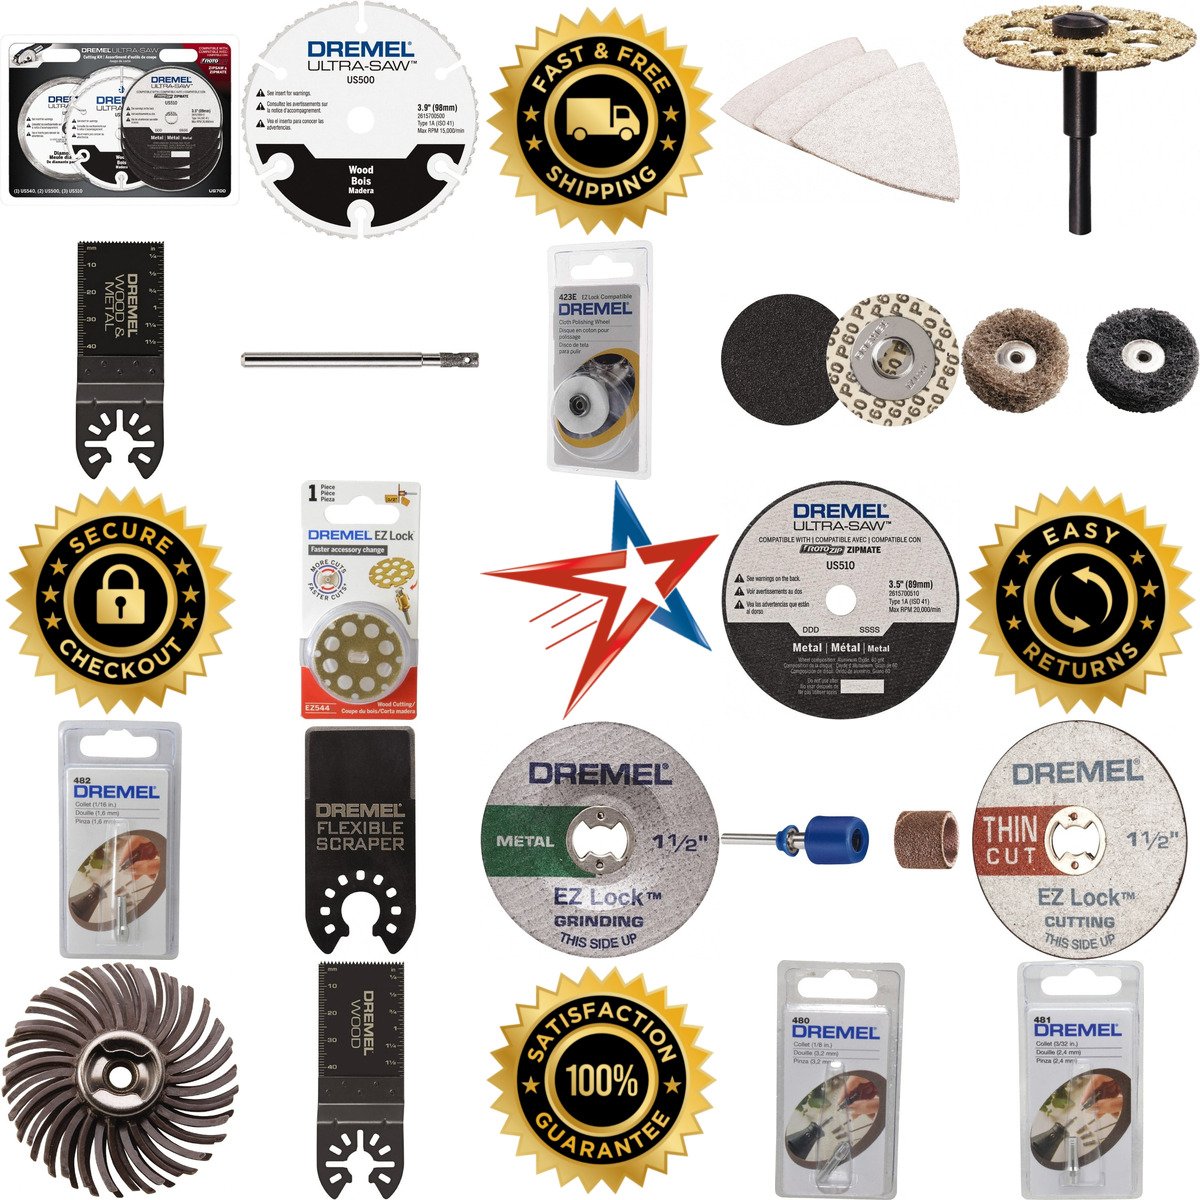 A selection of Dremel products on GoVets